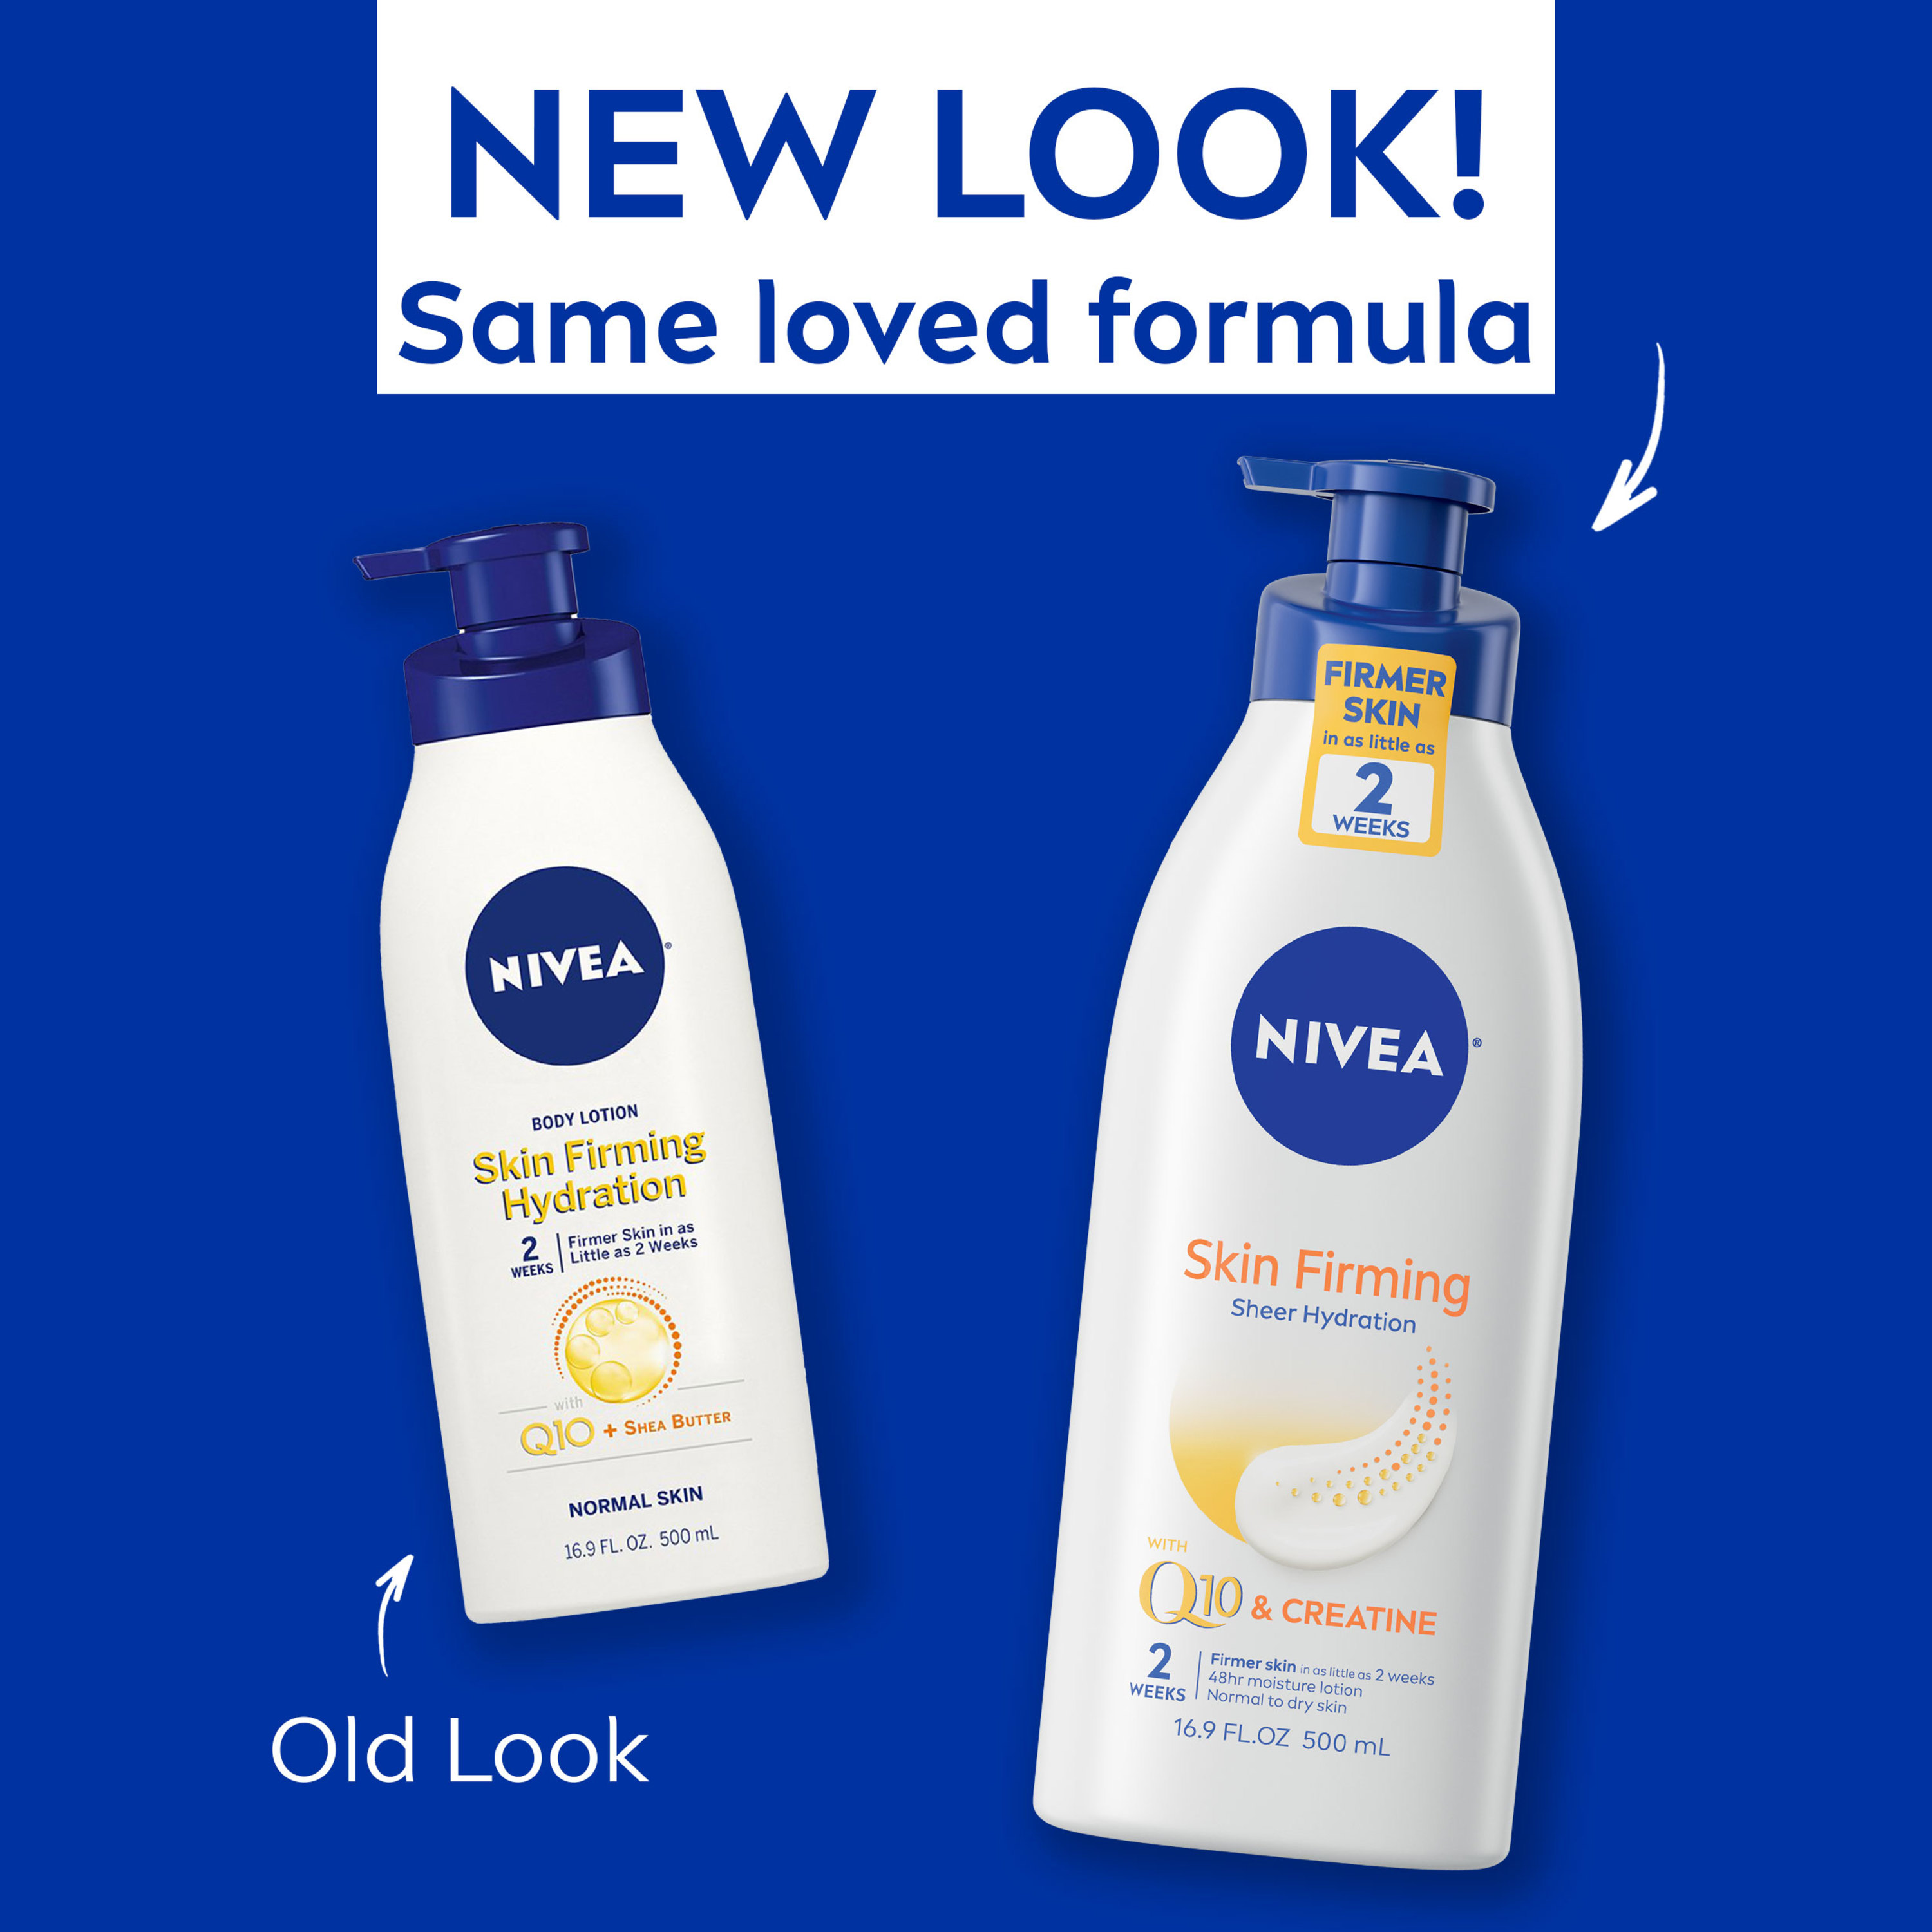 Nivea Skin Firming Hydration Body Lotion with Q10 and Shea Butter, 16.9 fl oz Pump Bottle - image 4 of 13